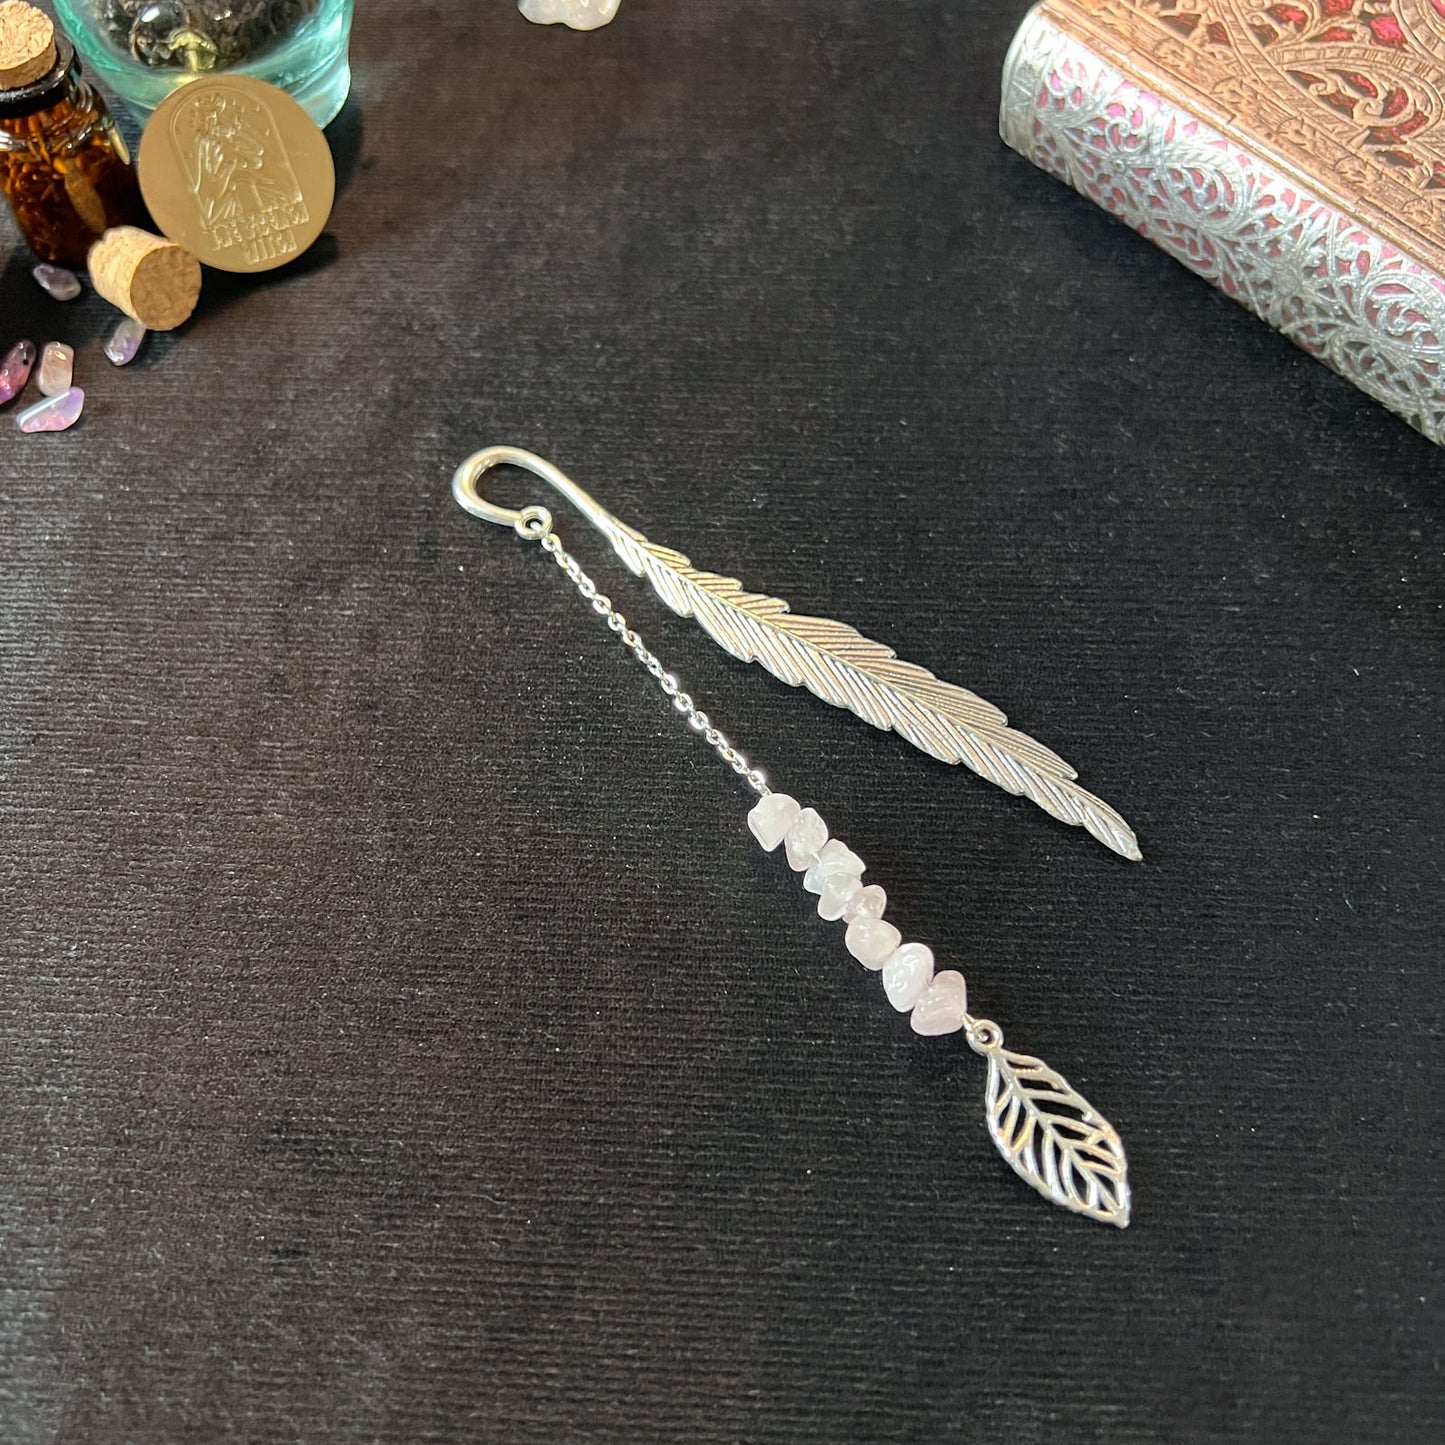 Big bookmark for your grimoire, book, journal, with gemstones and charms Baguette Magick